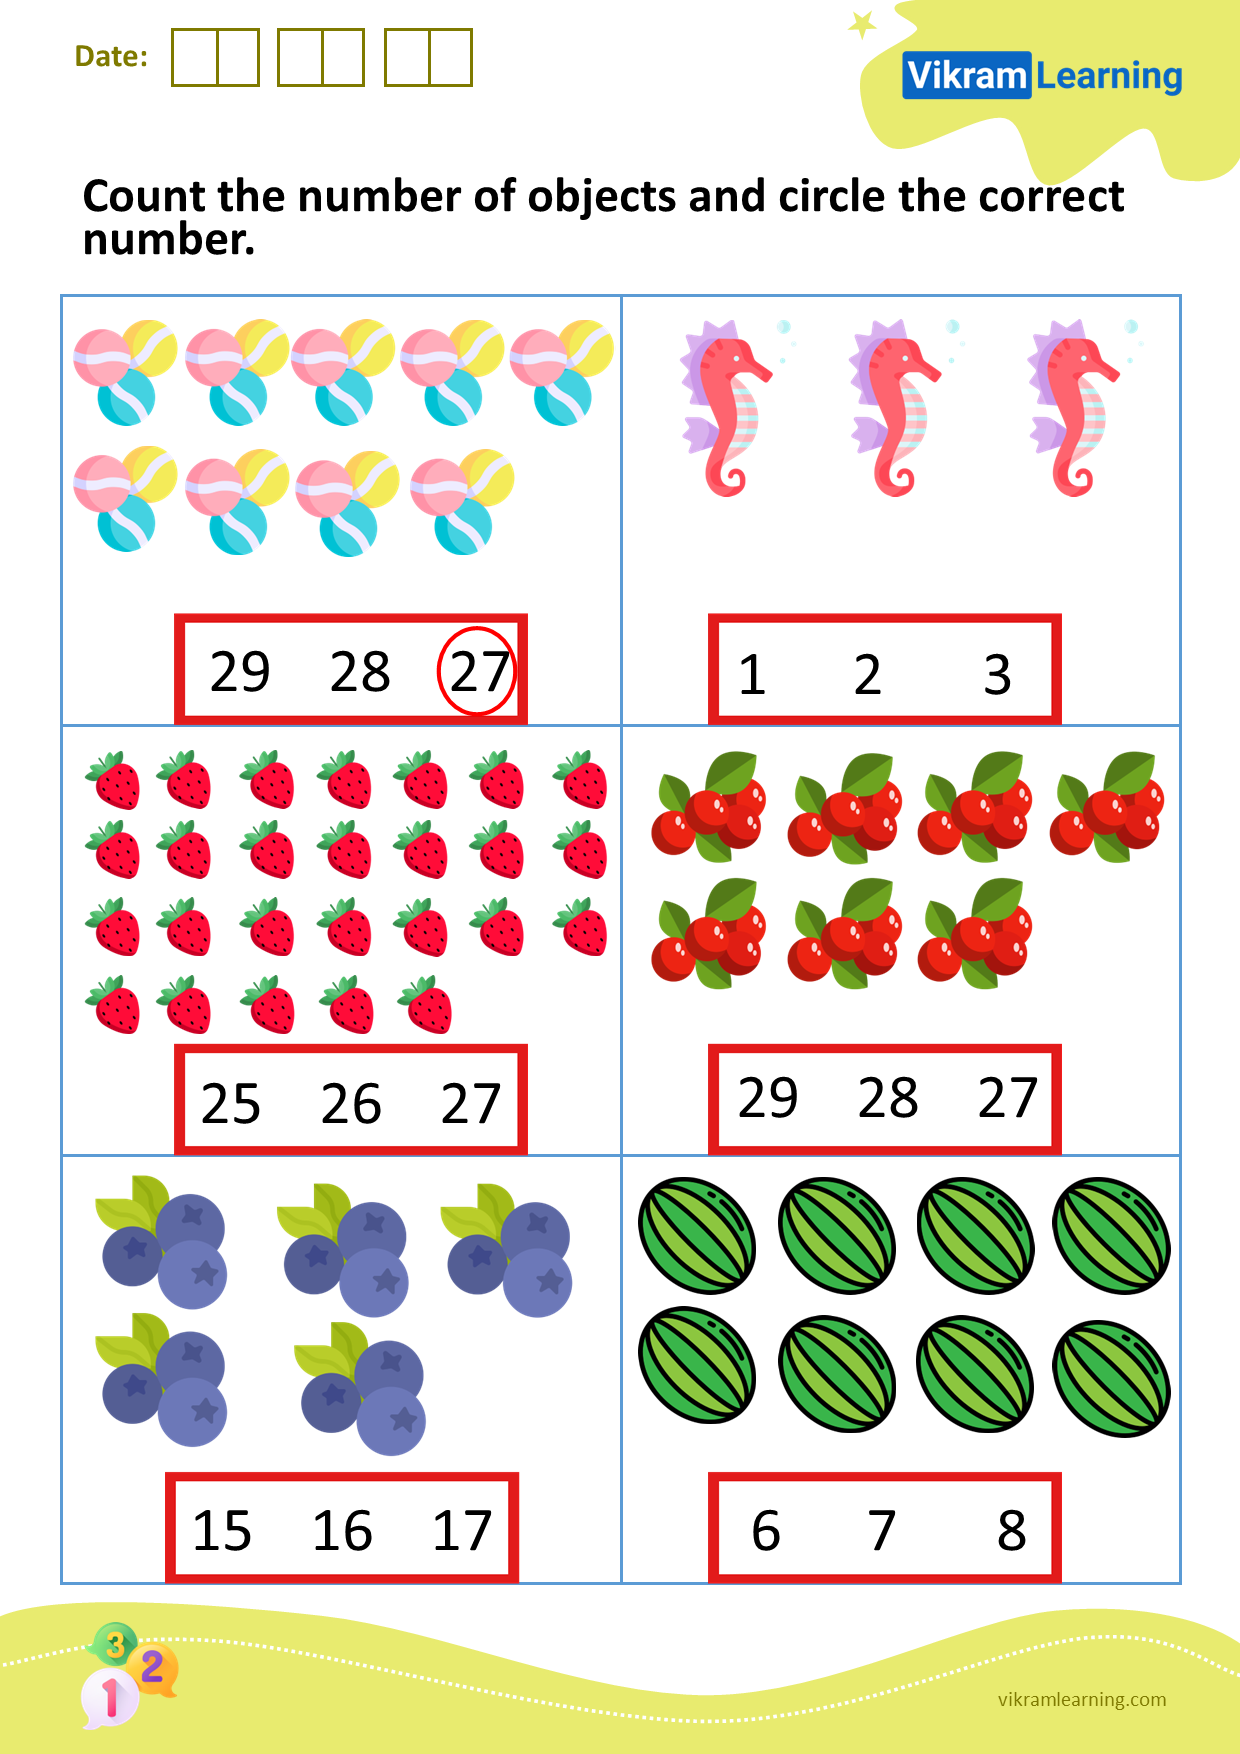 Download count the number of objects and circle the correct number worksheets